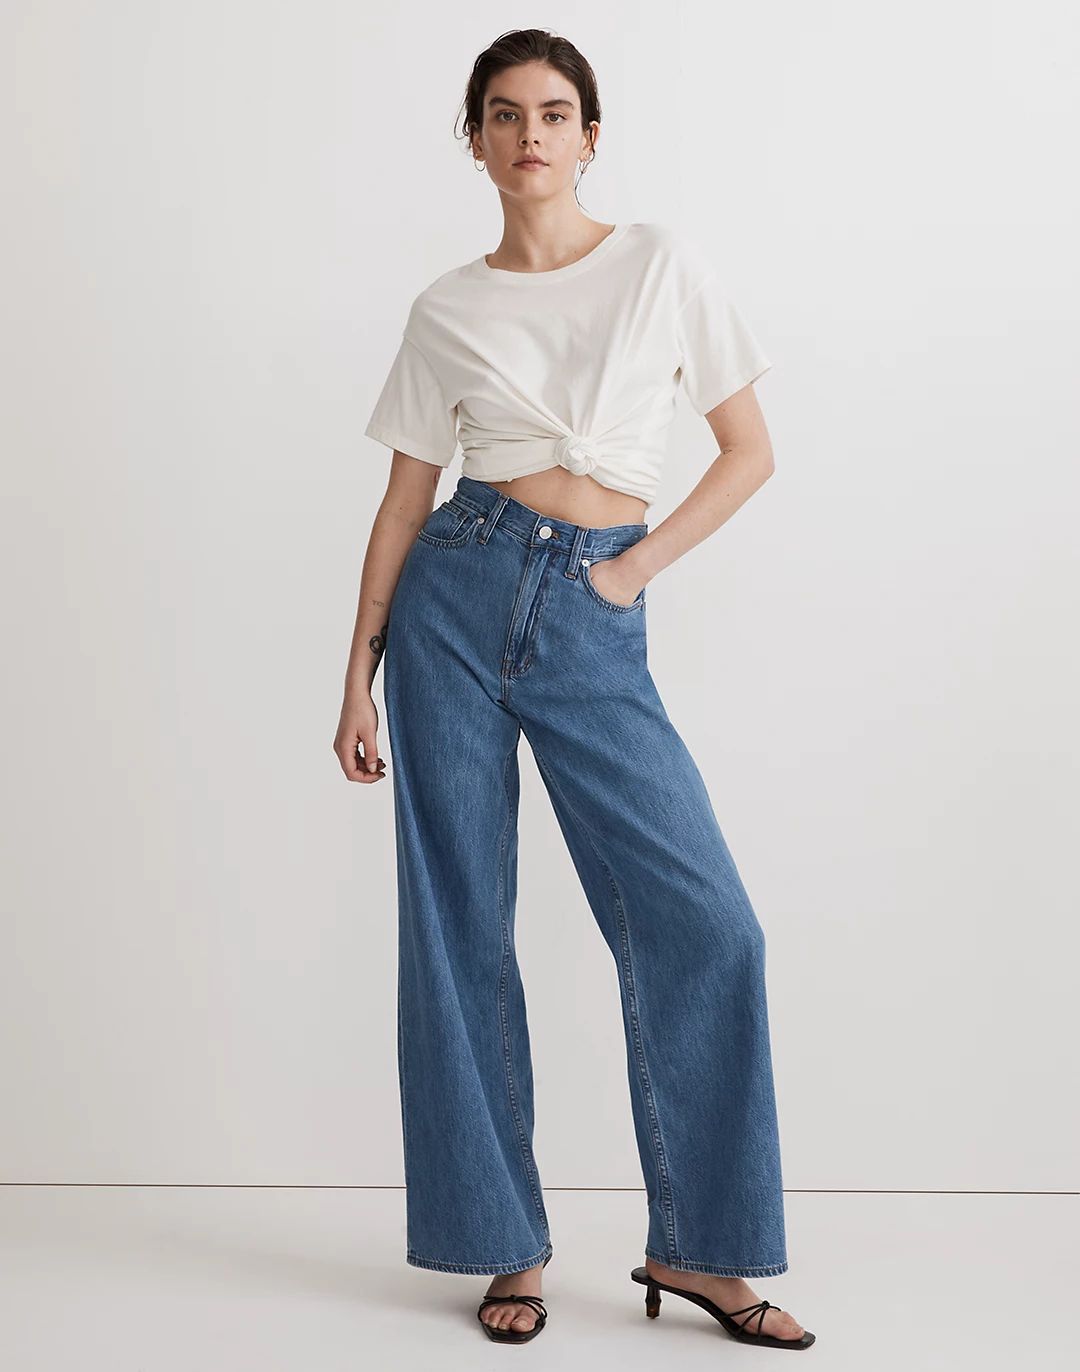 Superwide-Leg Jeans in Lessard Wash | Madewell